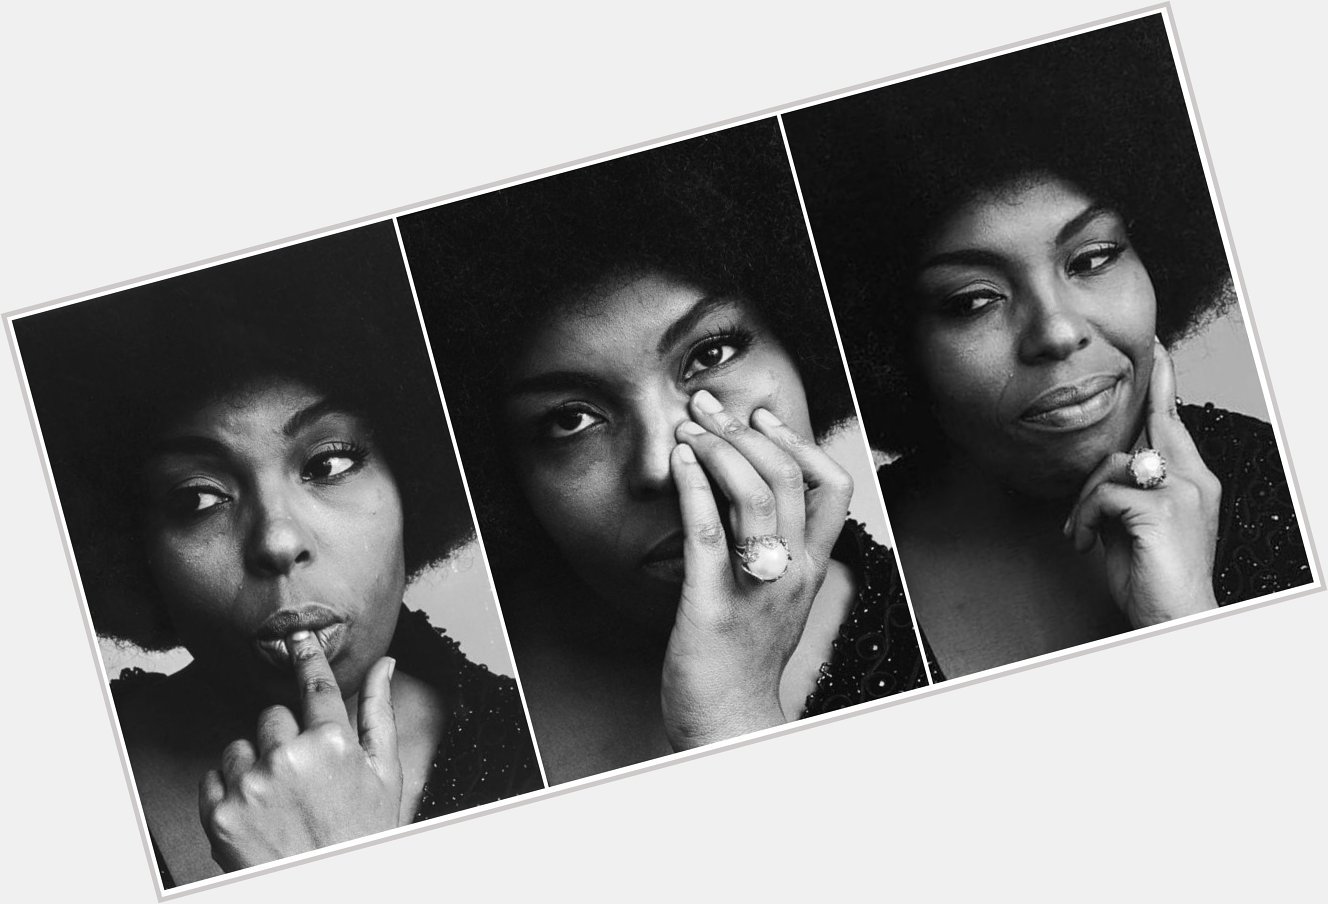 Happy birthday to Roberta Flack, photographed here by Jack Robinson in 1969. 